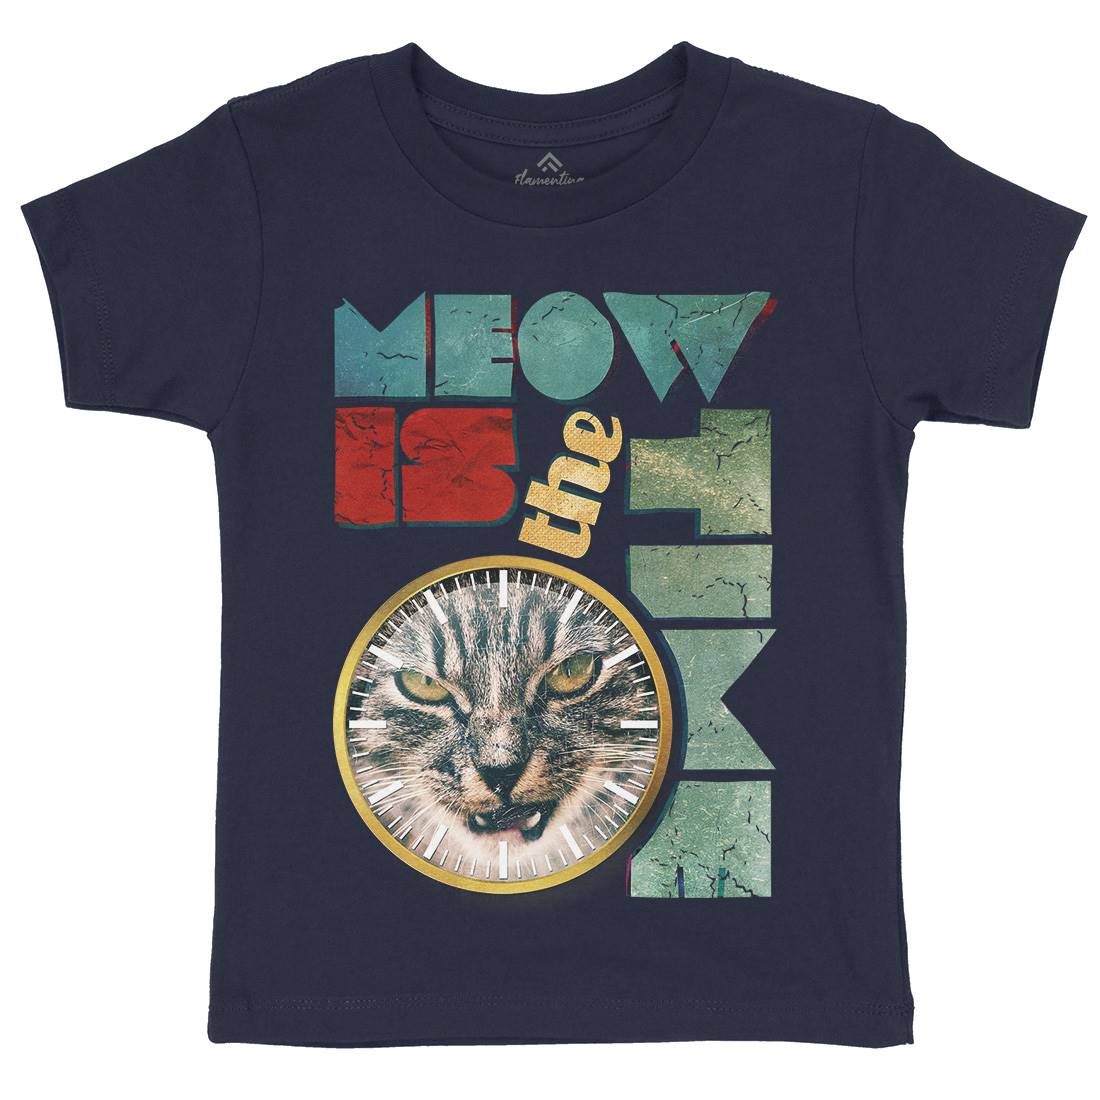 Meow Is The Time Kids Organic Crew Neck T-Shirt Animals A876